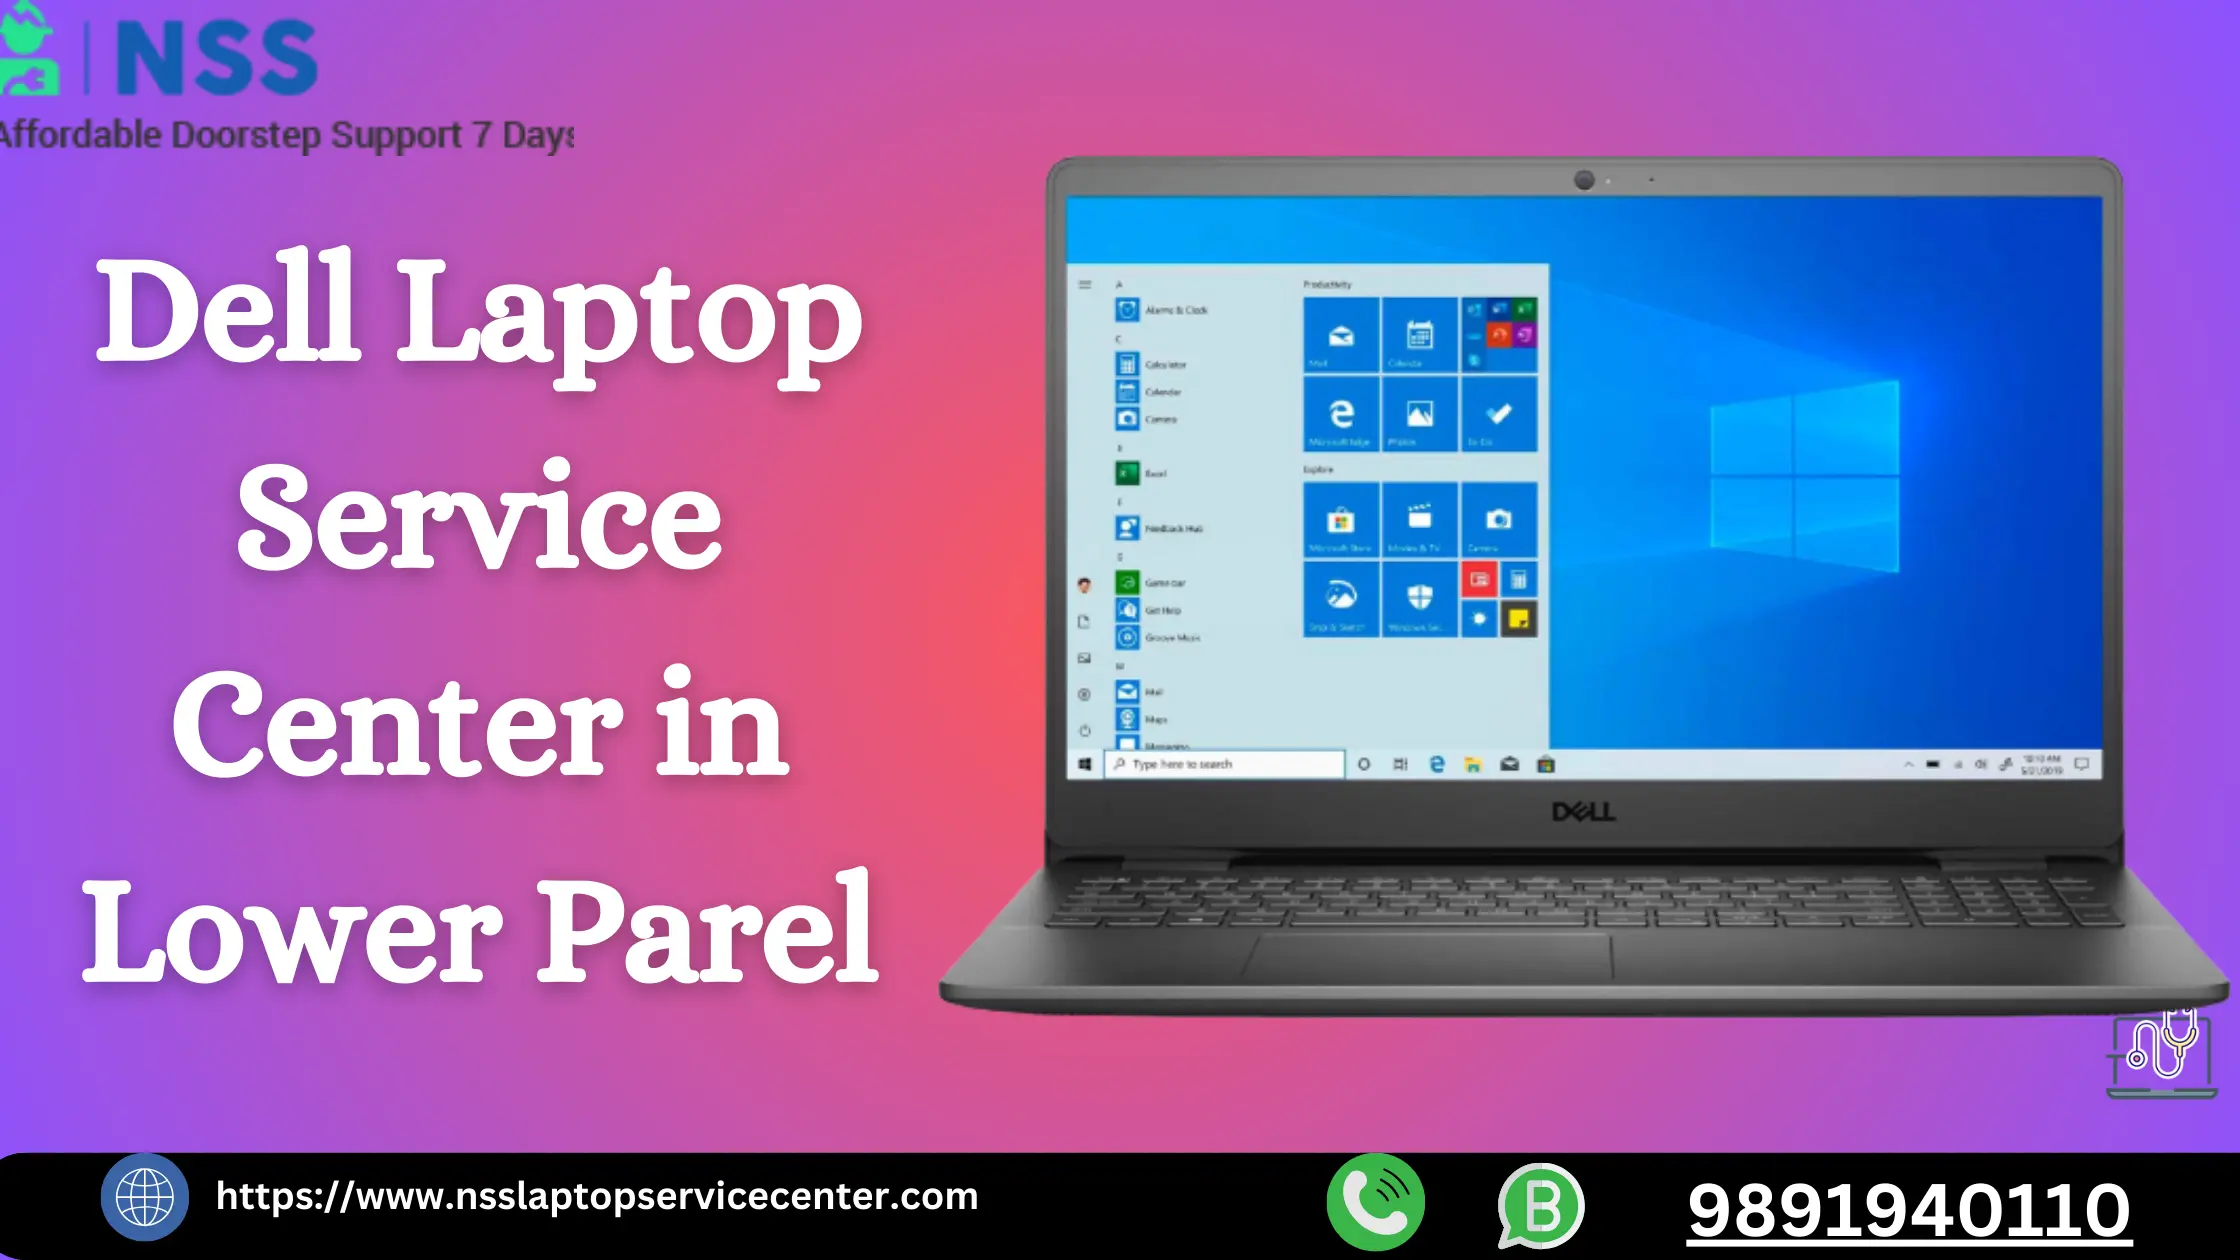 Dell Laptop Service Center in Lower Parel Near Mumbai